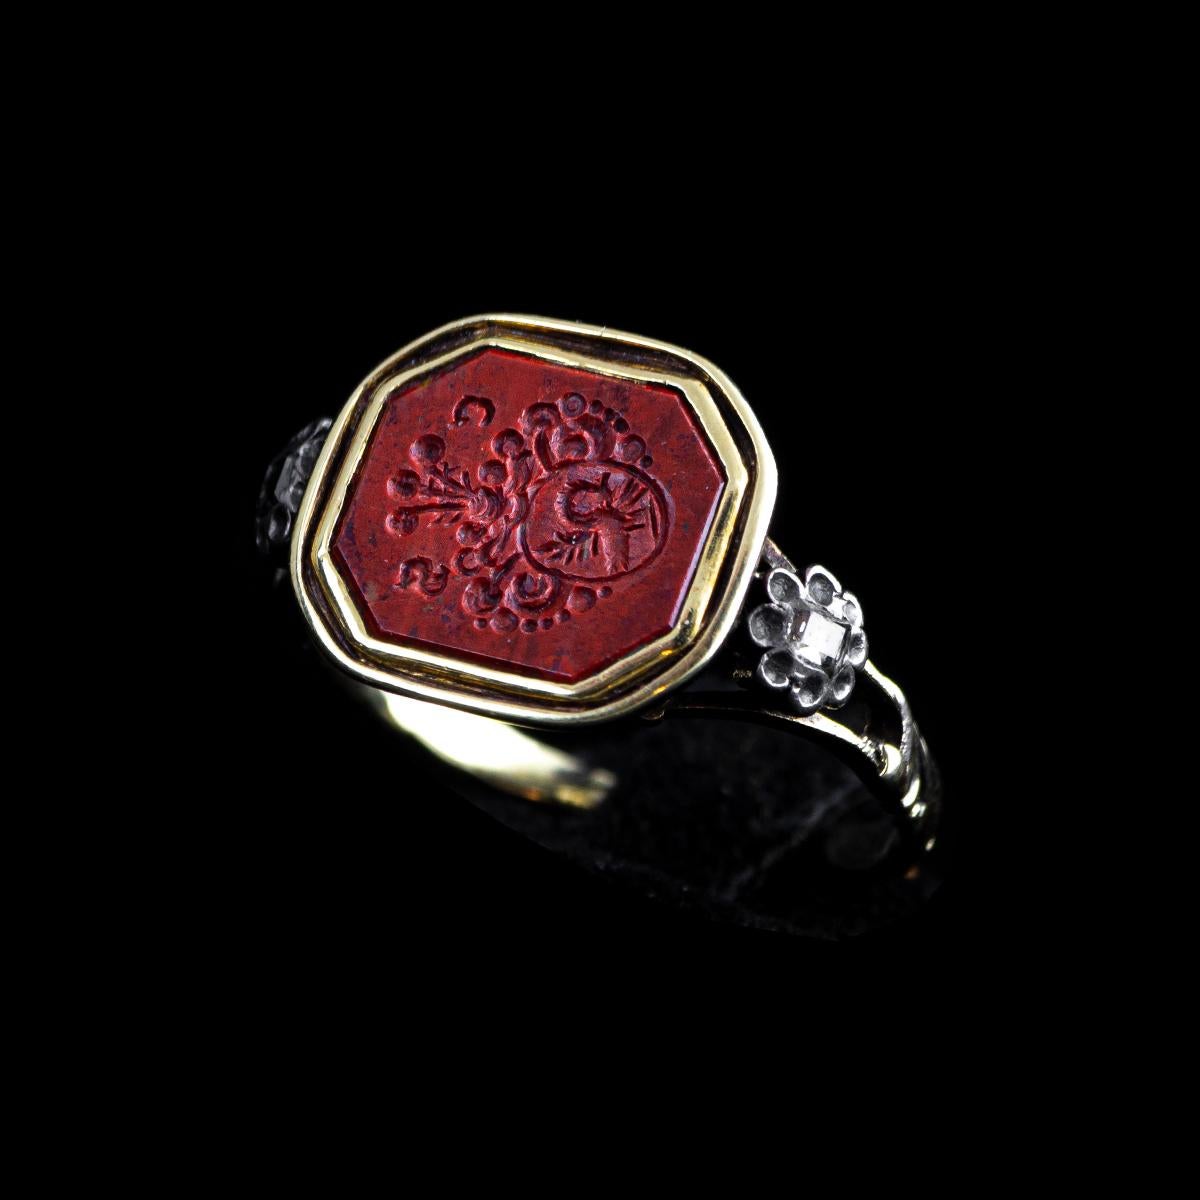 Mixed Cut 14 Kt Yellow Gold Ring with 1840s Heraldic Emblem Carved Jasper For Sale